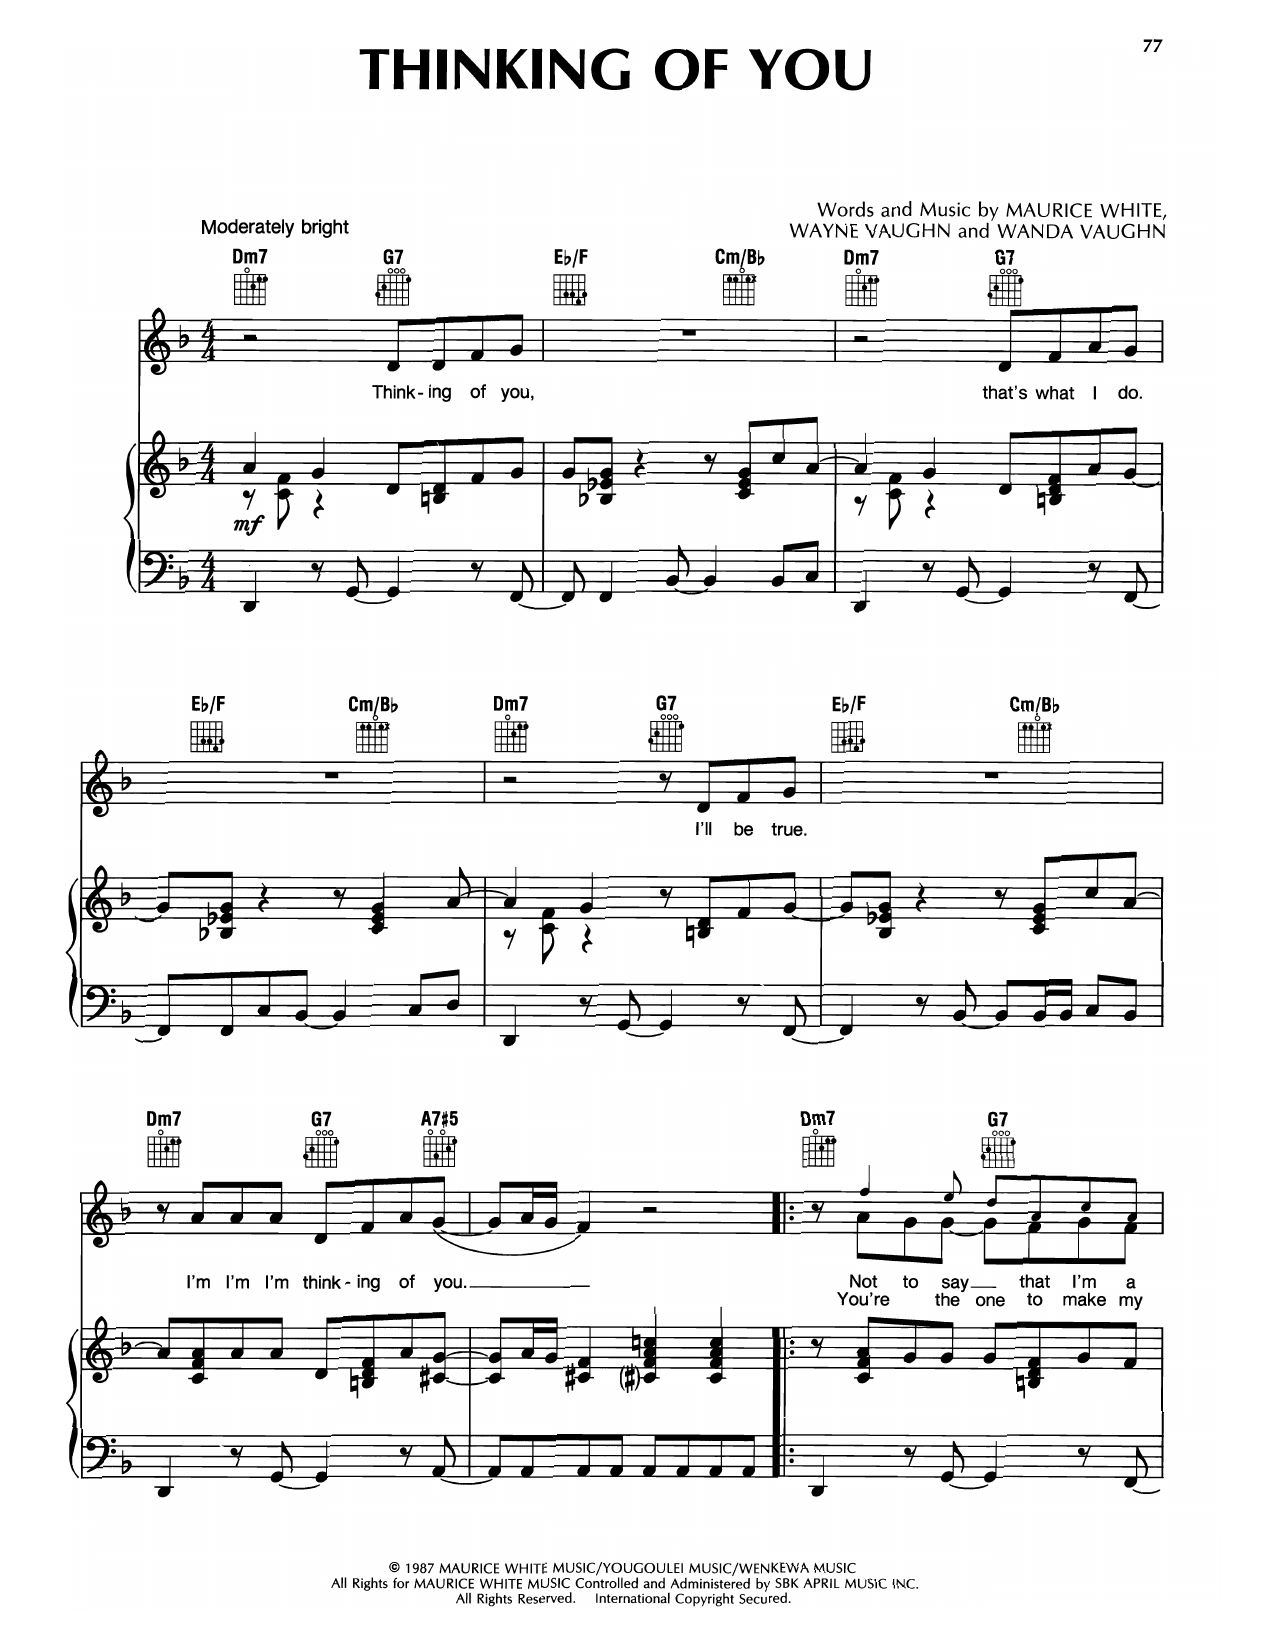 Download Earth, Wind & Fire Thinking Of You Sheet Music